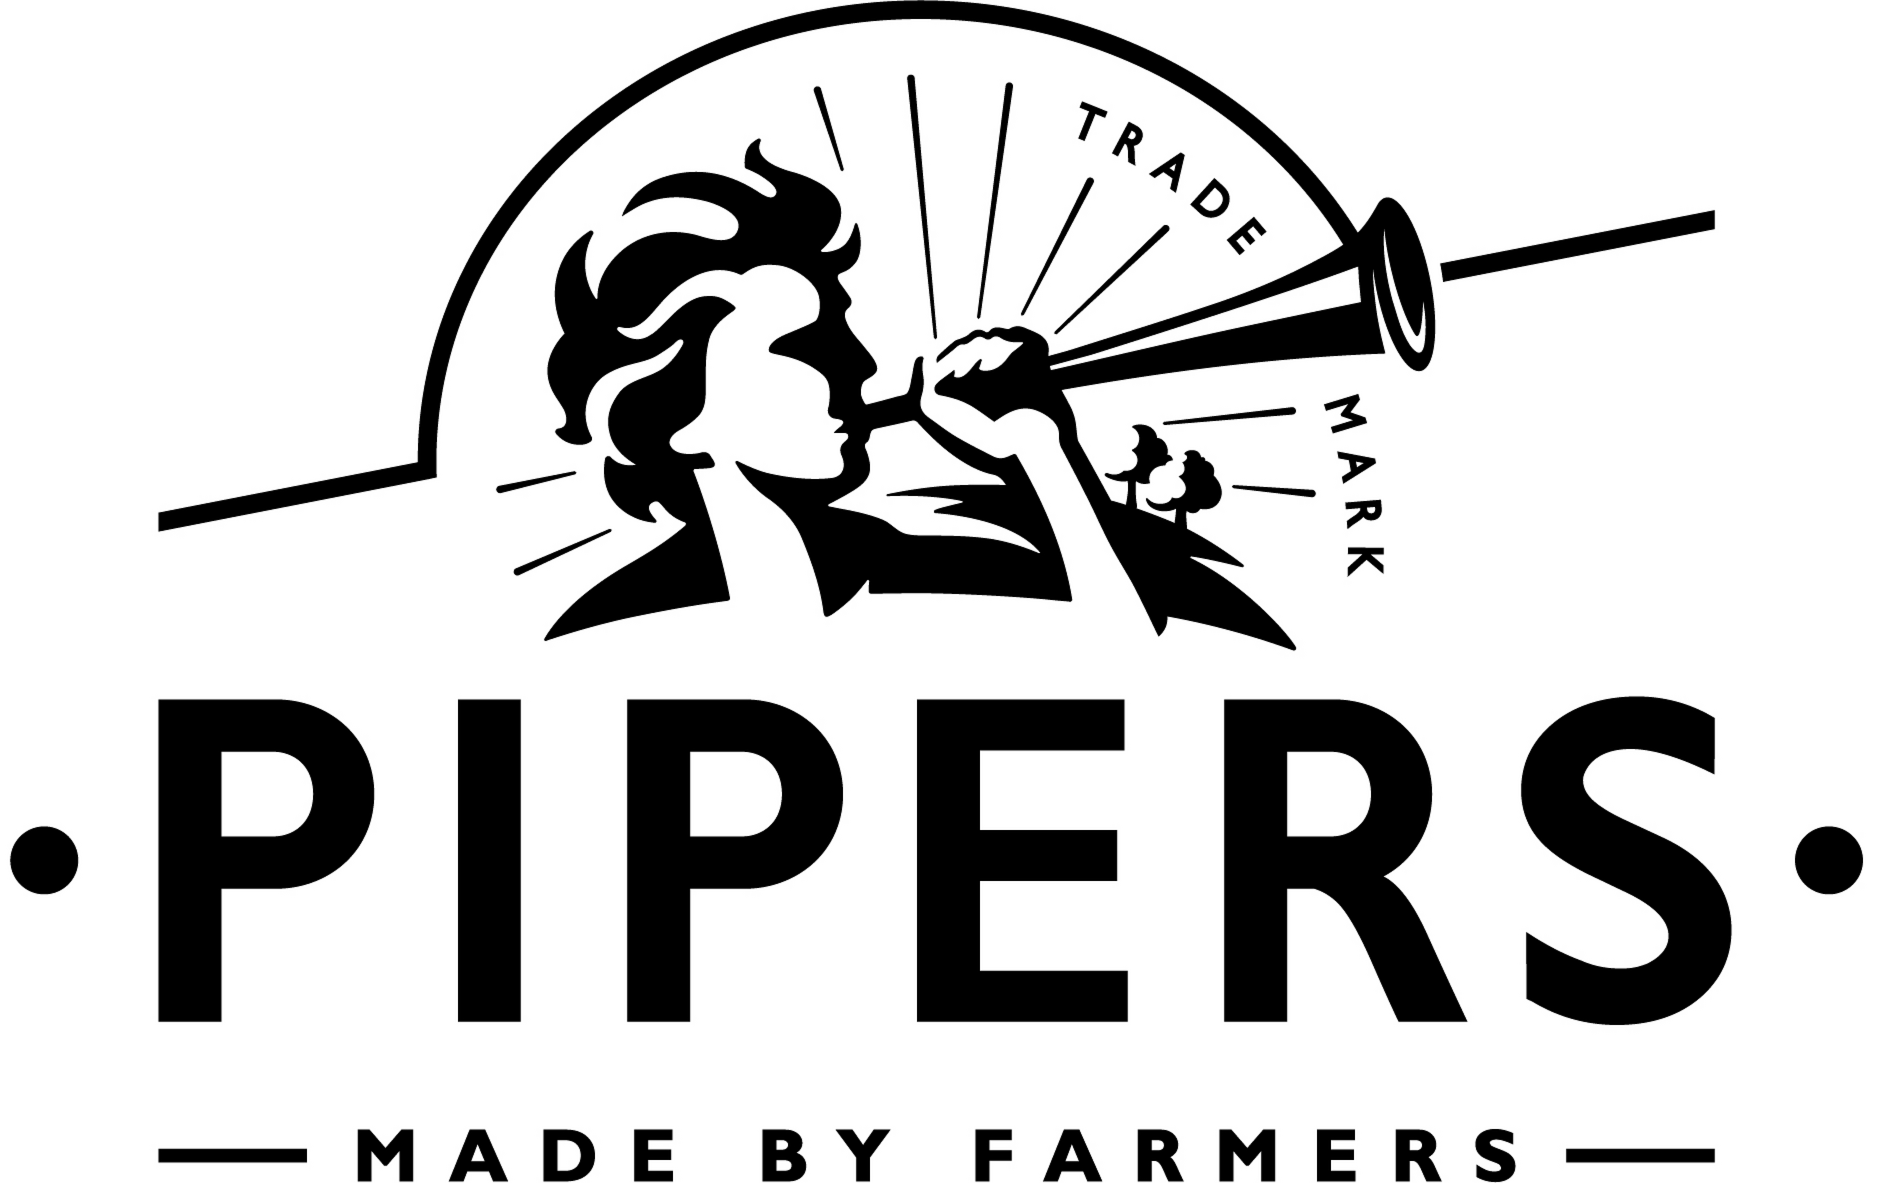 Pipers Crisps